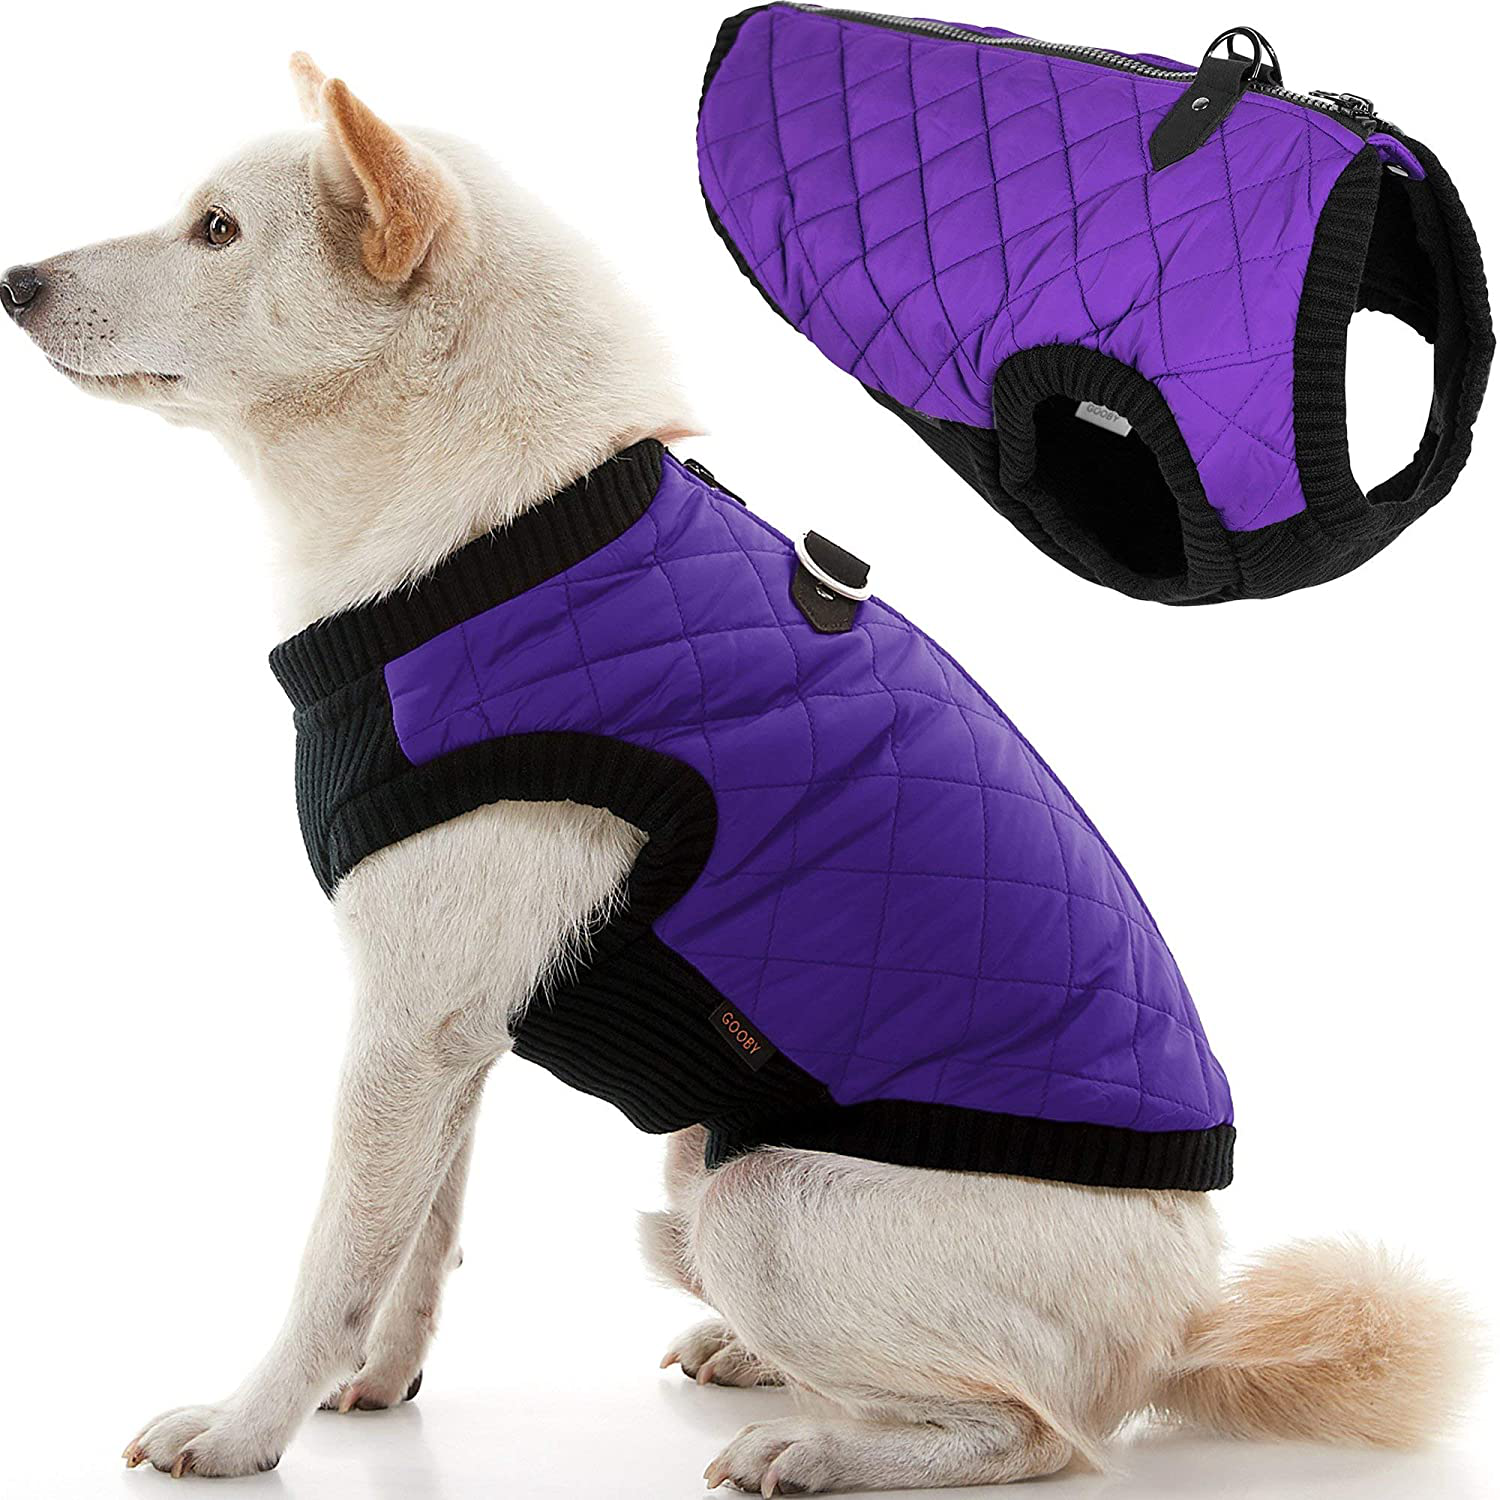 Gooby Fashion Vest Dog Jacket - Warm Zip up Dog Bomber Vest with Dual D Ring Leash - Winter Water Resistant Small Dog Sweater - Dog Clothes for Small Dogs Boy or Medium Dogs for Indoor and Outdoor Use Animals & Pet Supplies > Pet Supplies > Dog Supplies > Dog Apparel Gooby Violet Medium chest (~14.5") 